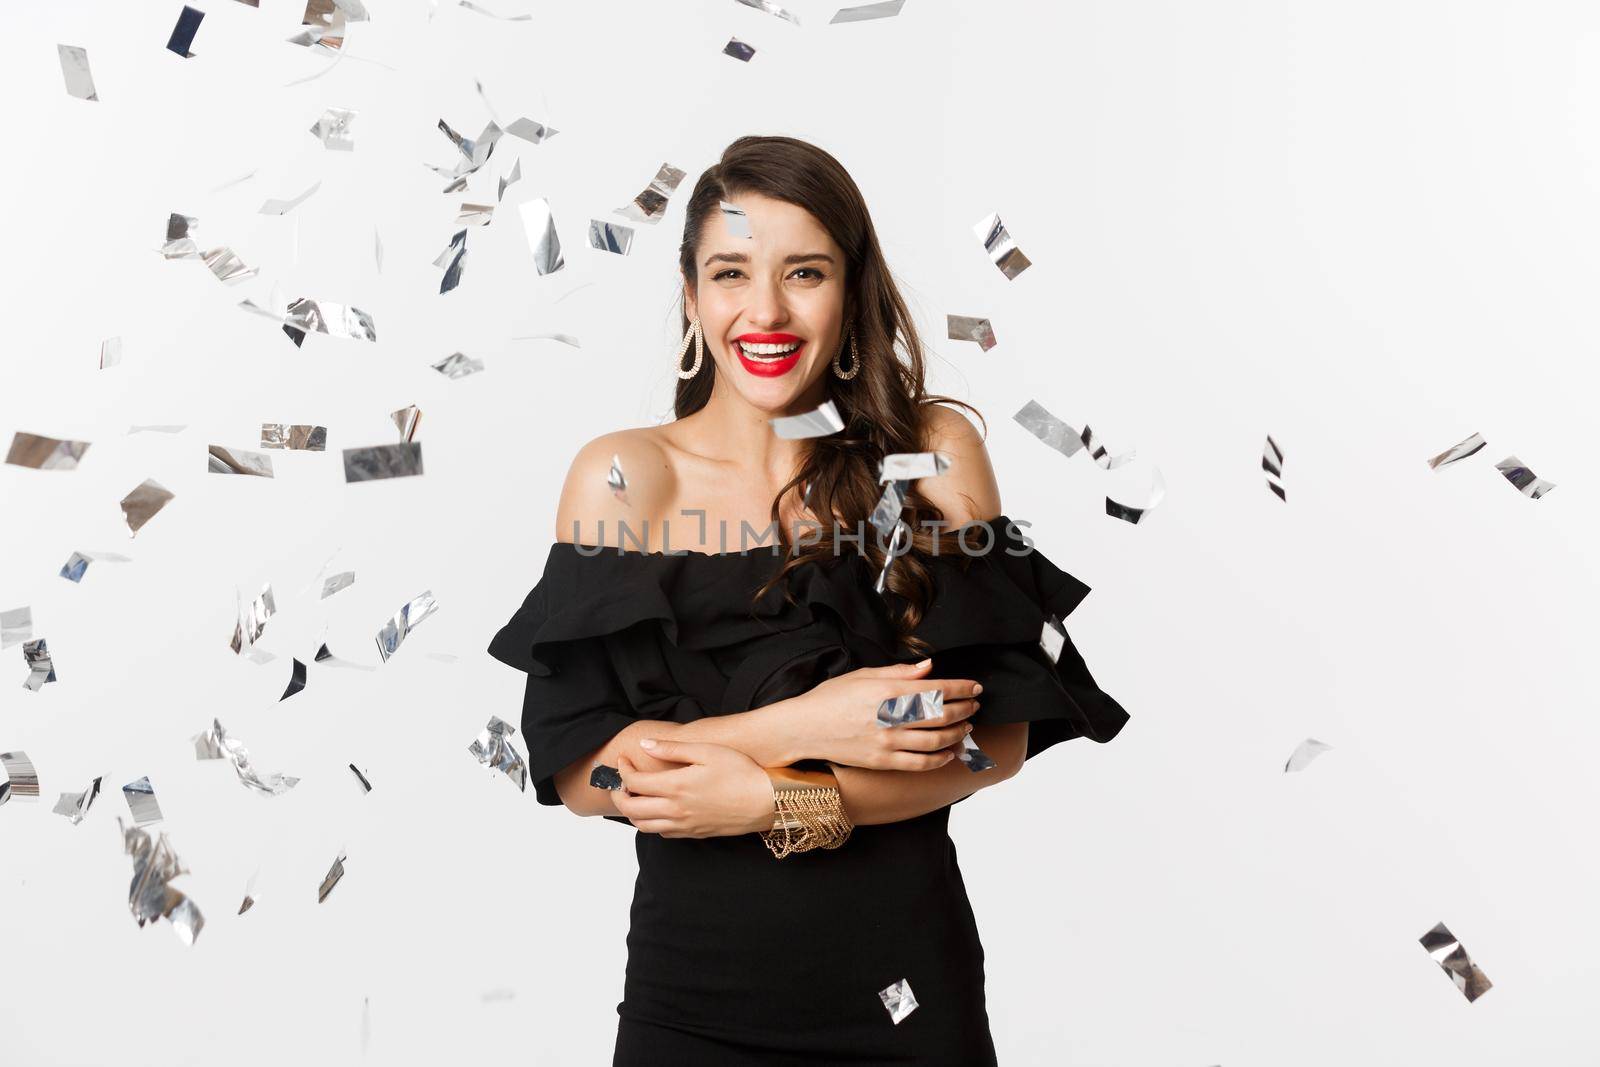 Happy woman celebrating winter holidays, smiling cheerful, partying on New Year with confetti, standing over white background.